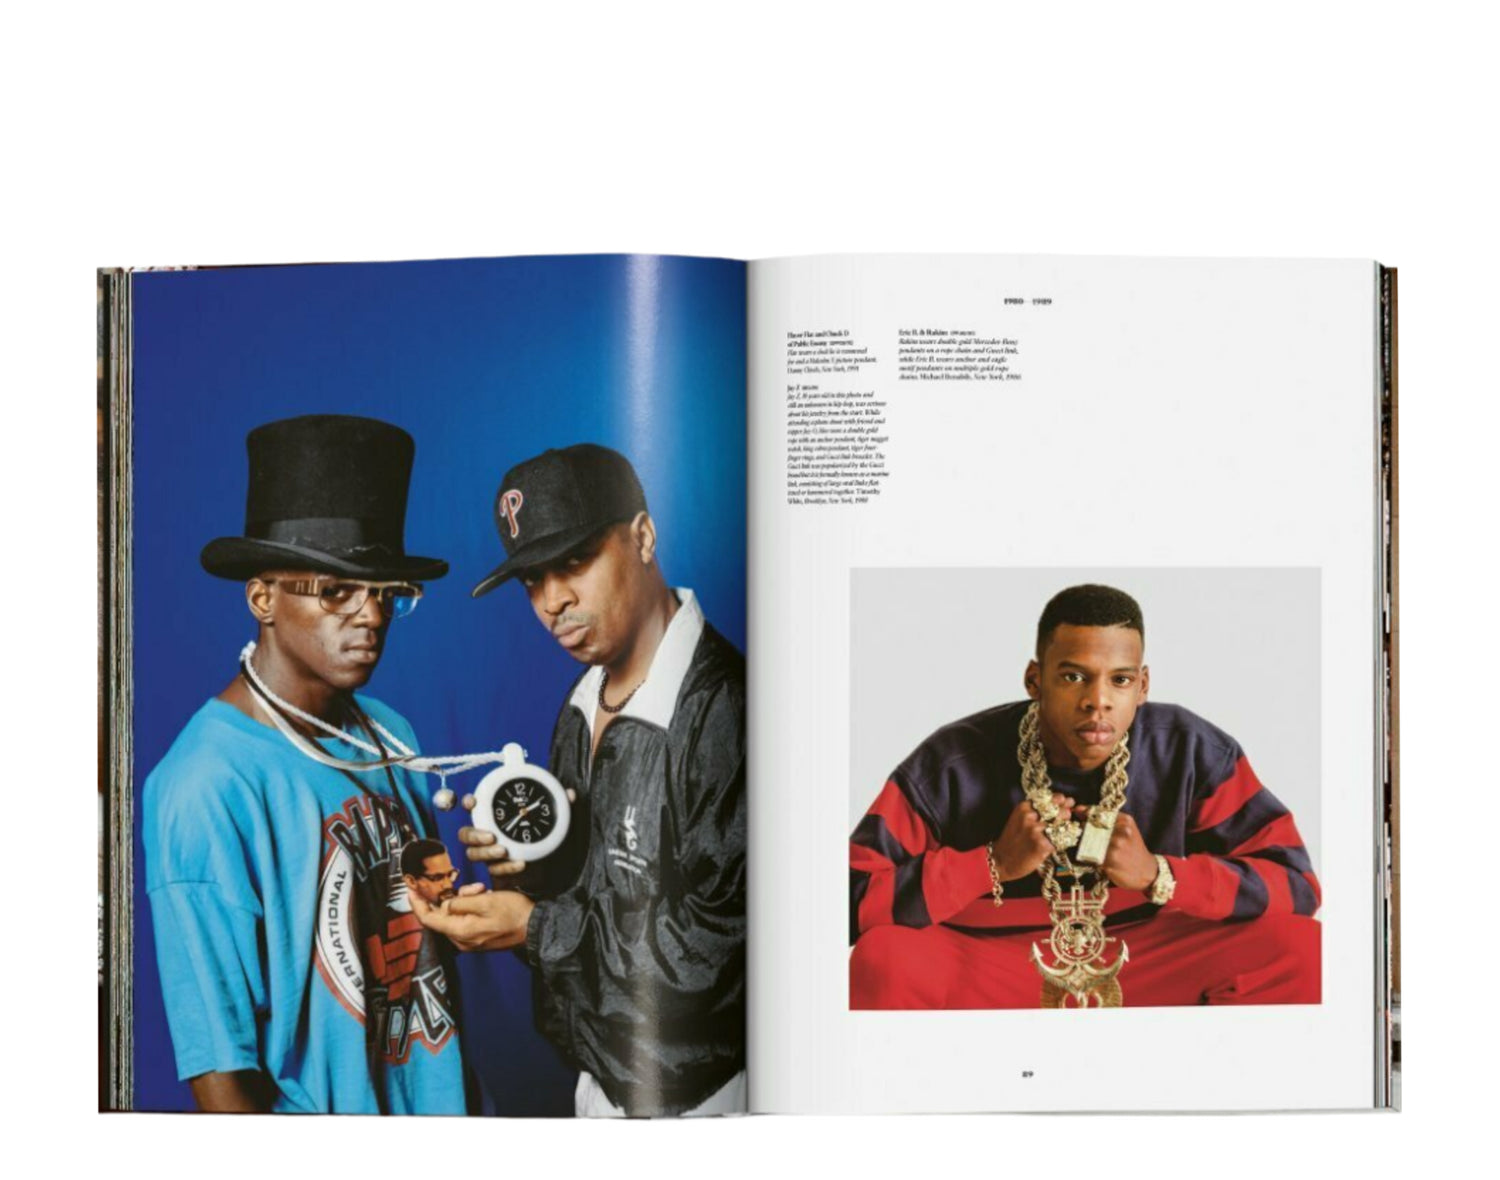 Taschen Books - Ice Cold. A Hip-Hop Jewelry History Hard Cover Book